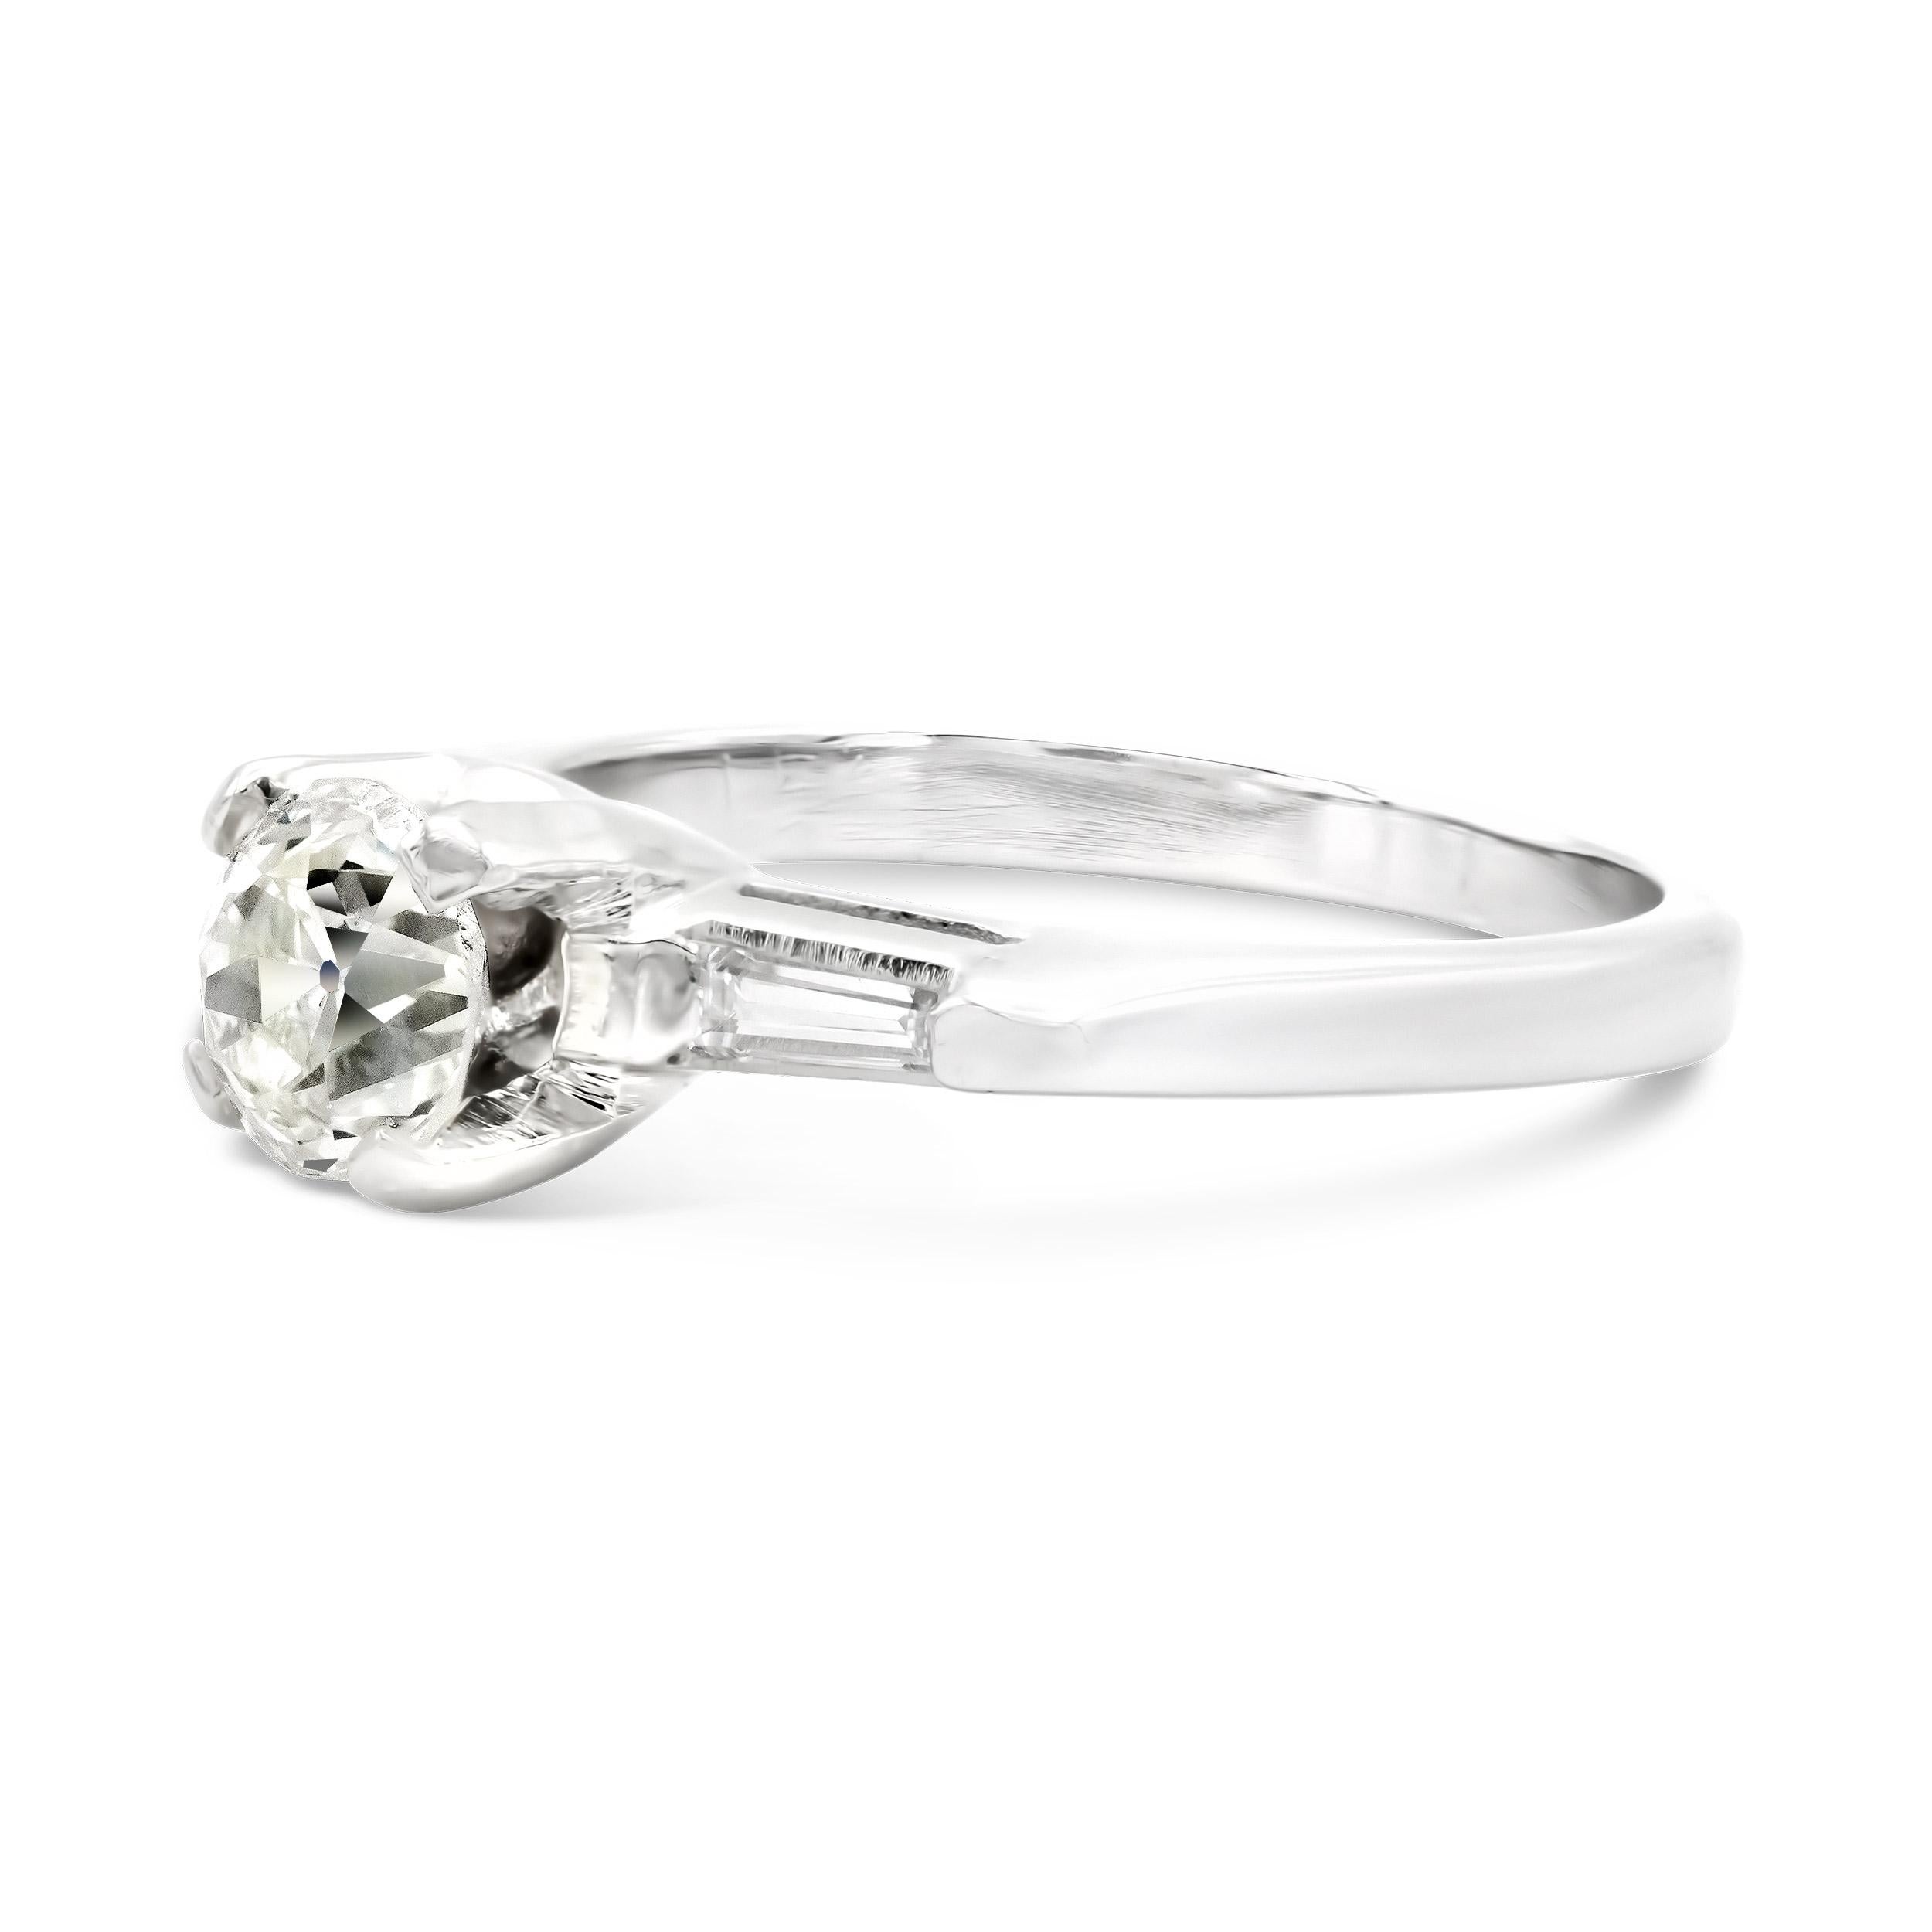 This art deco engagement ring setting is as sweet as it gets. It's centered by a 0.70 carat old European cut with an overall lovely look. Shouldered by classic tapered baguettes, this ring is pure elegance that will never go out of style.

Diamond